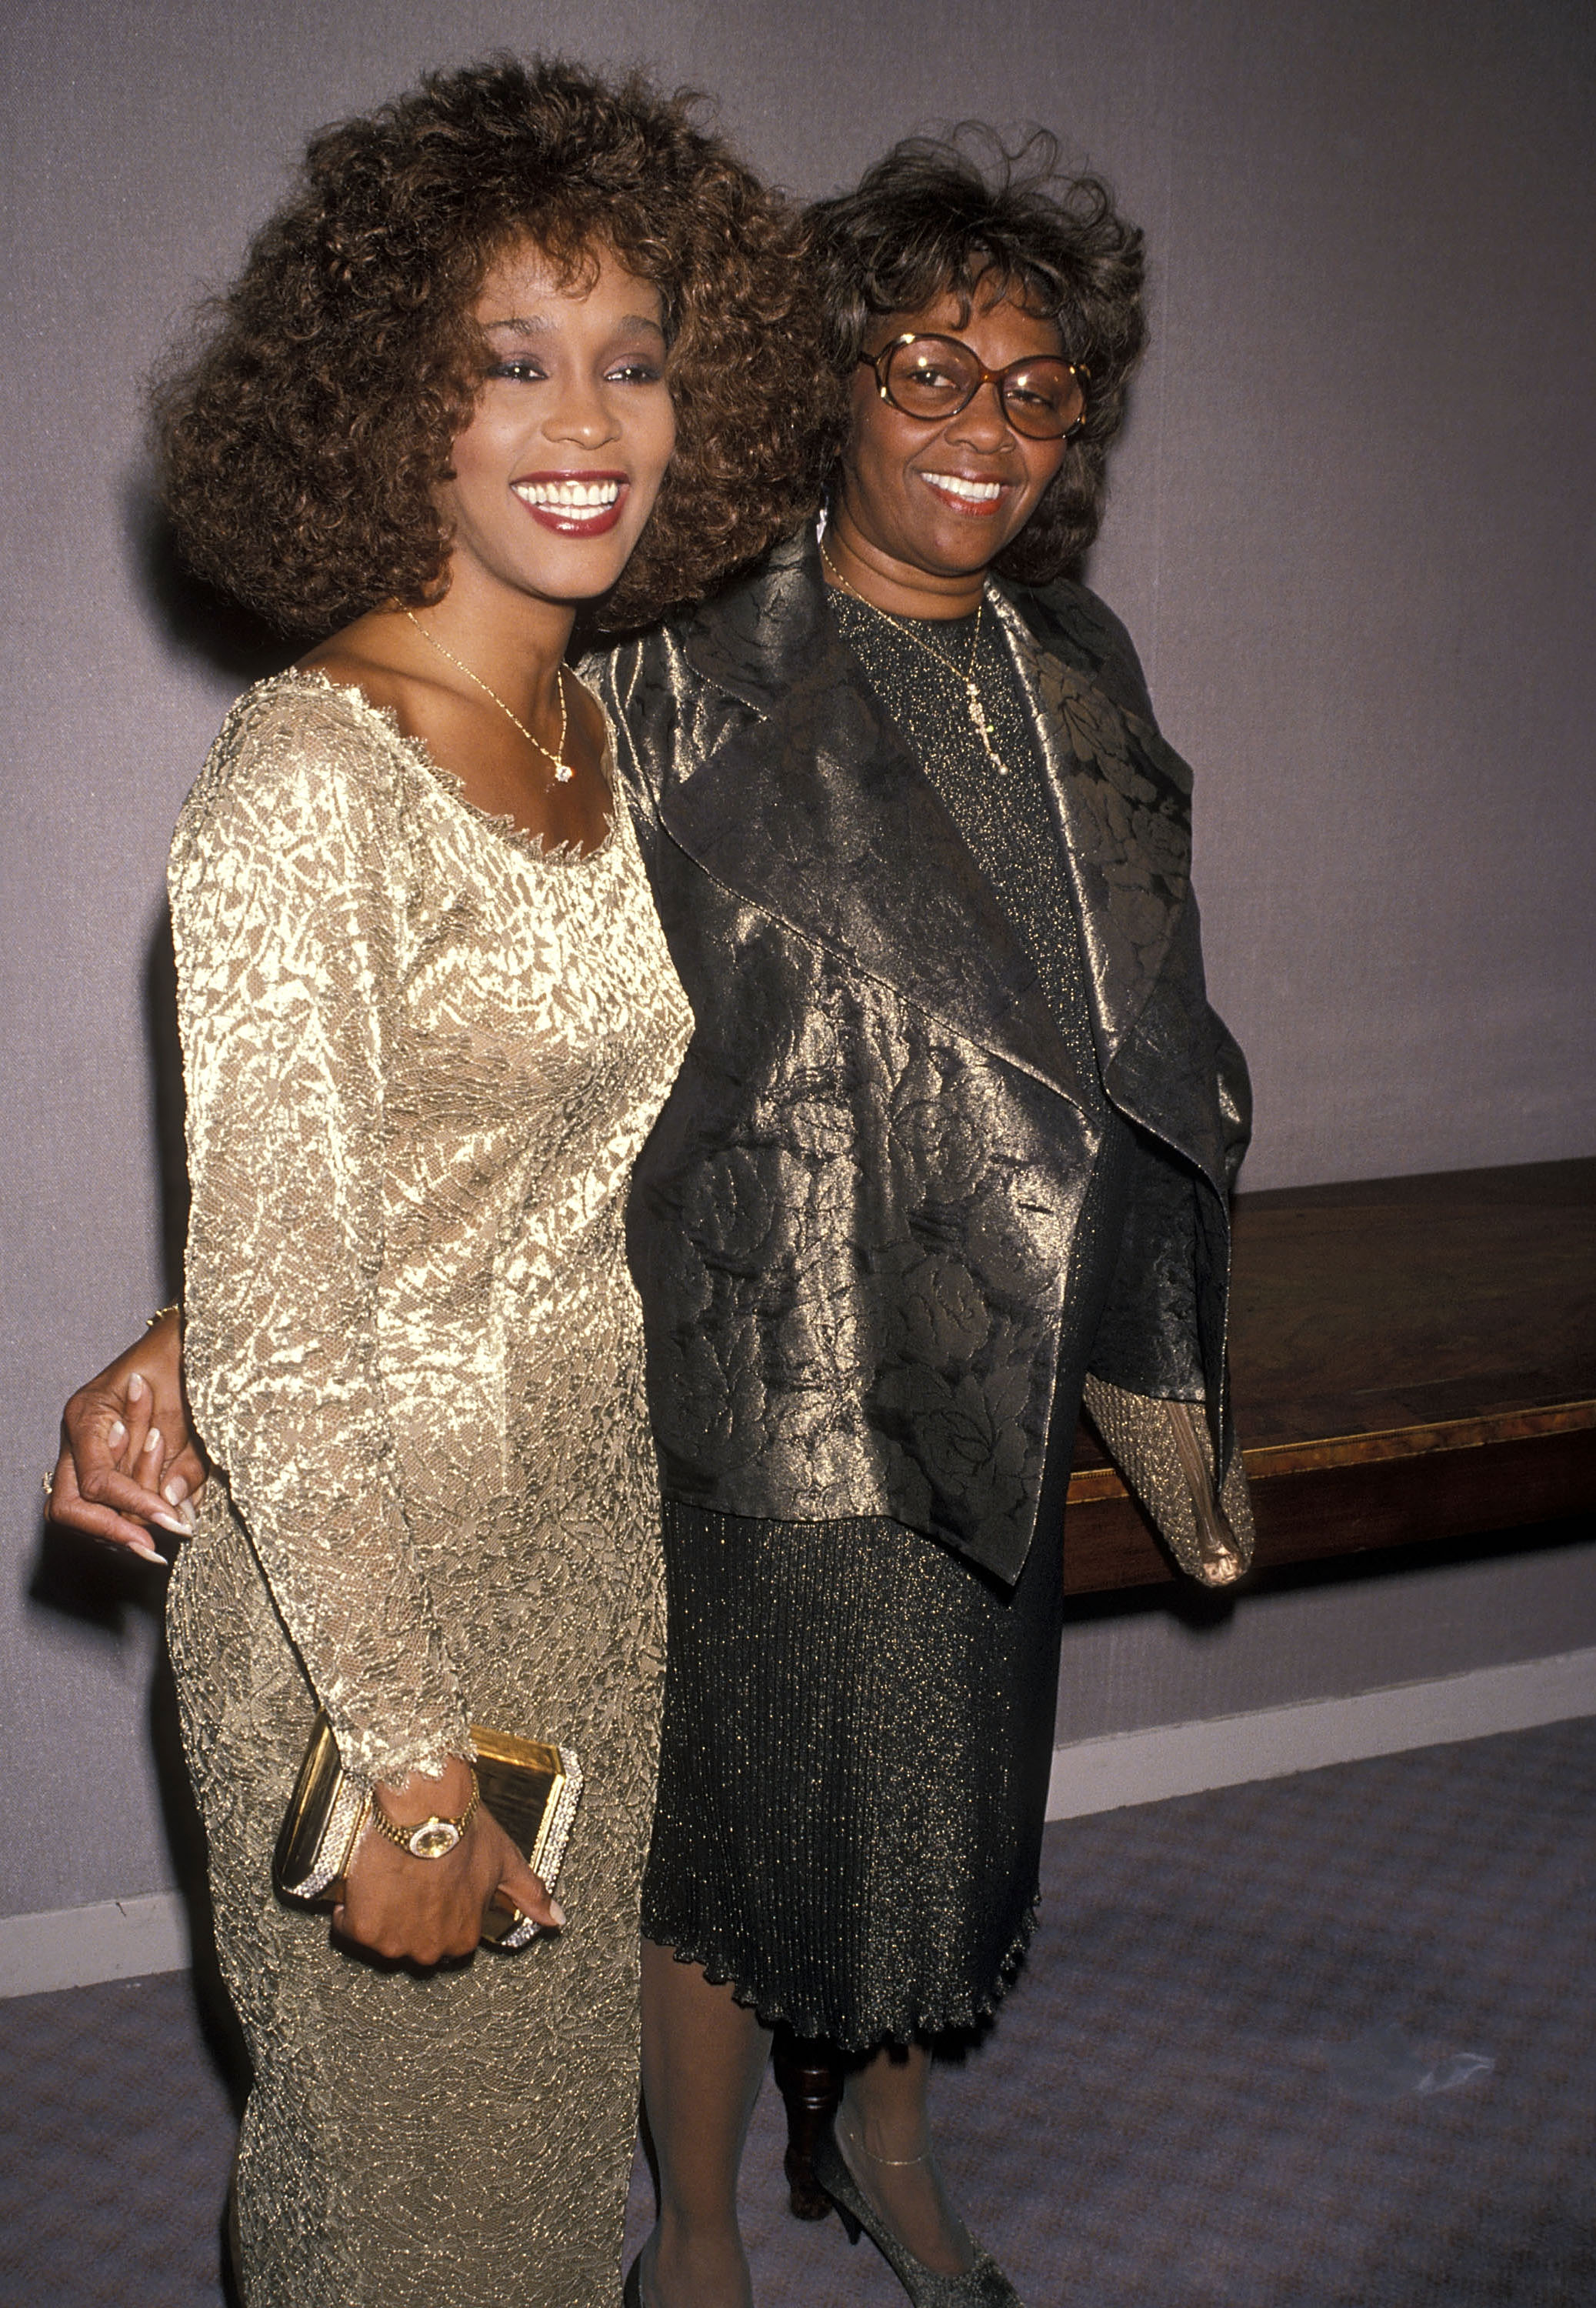 Whitney Houston and her mother Cissy at the Songwriters Hall of Fame Induction Ceremony in New York in 1990 | Source: Getty Images